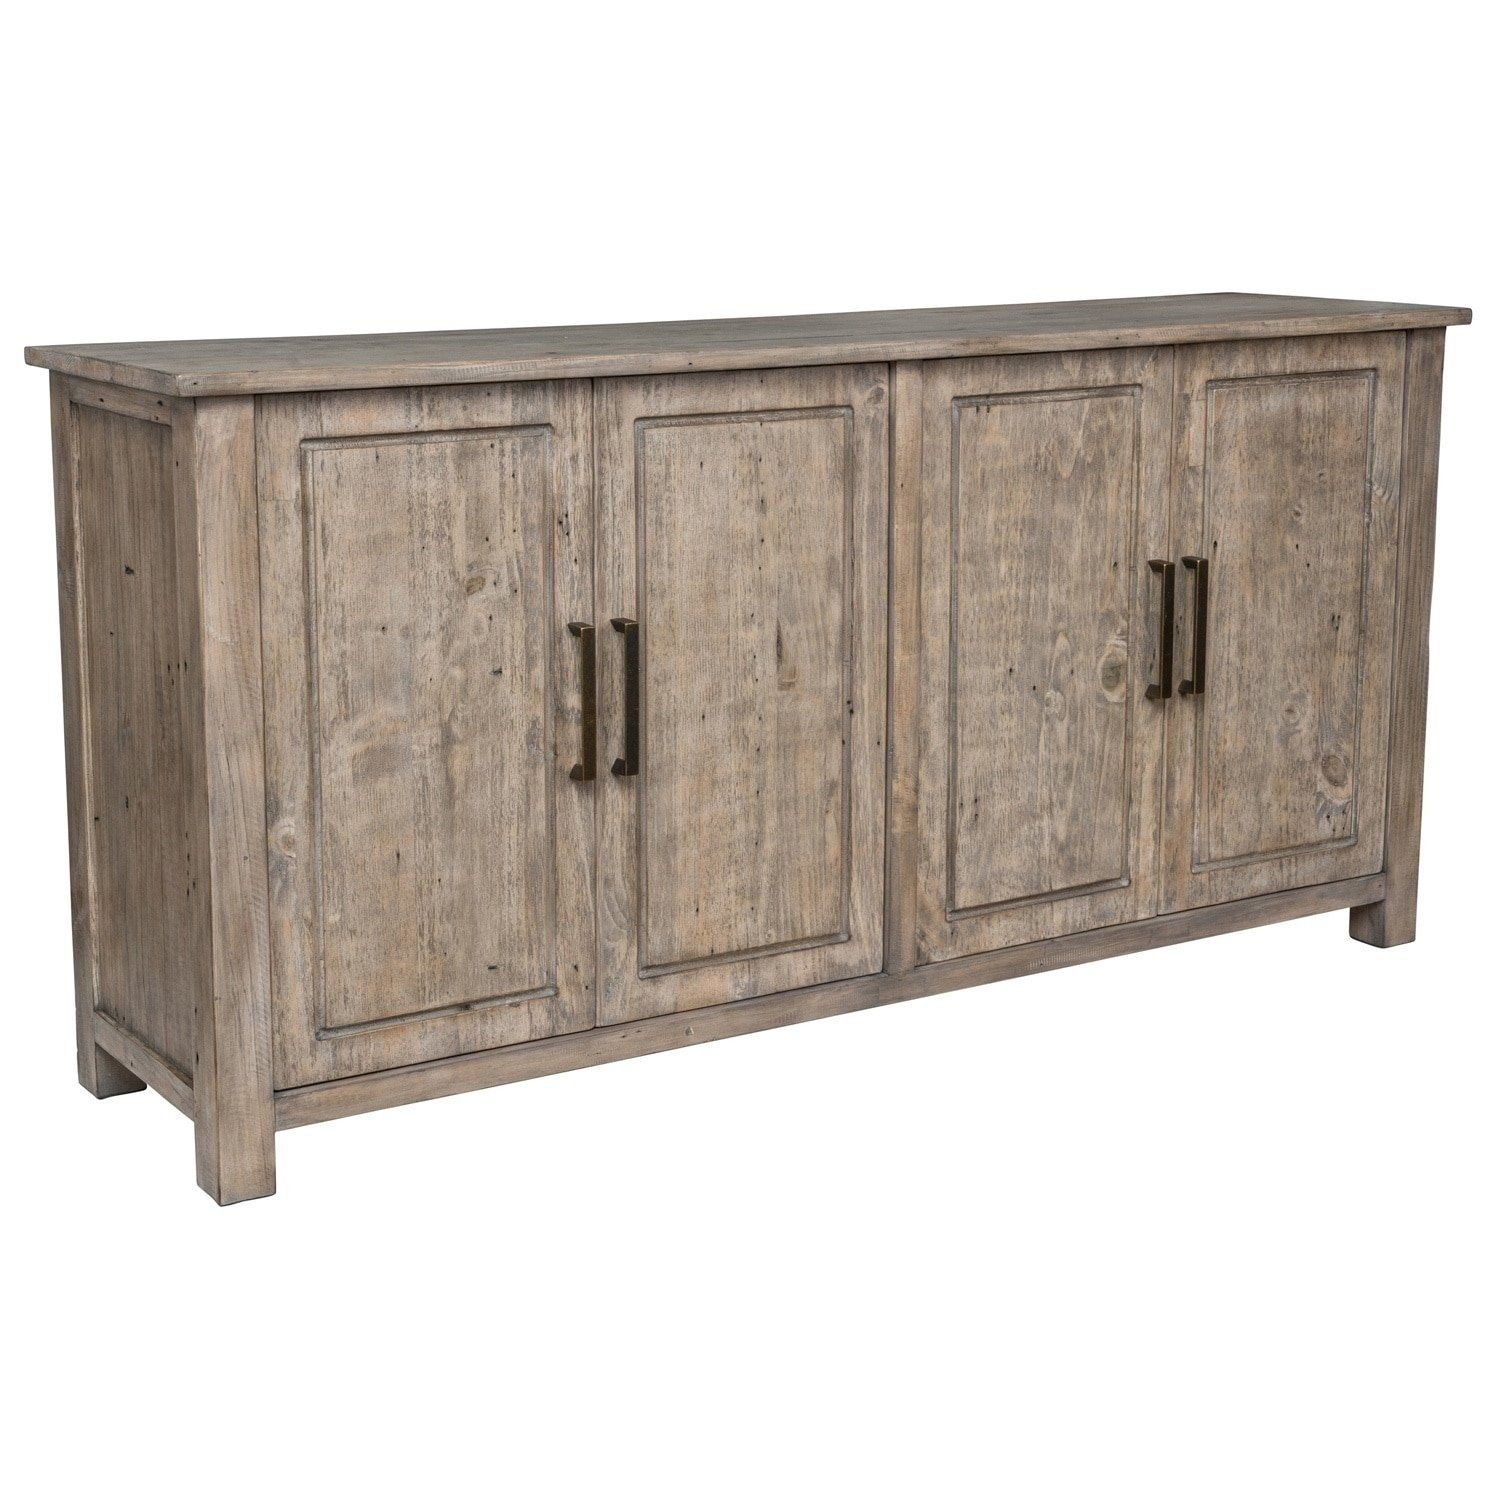 Shop Aires Reclaimed Wood 72 Inch Sideboardkosas Home – Free Regarding Most Current Brown Wood 72 Inch Sideboards (Photo 2 of 20)